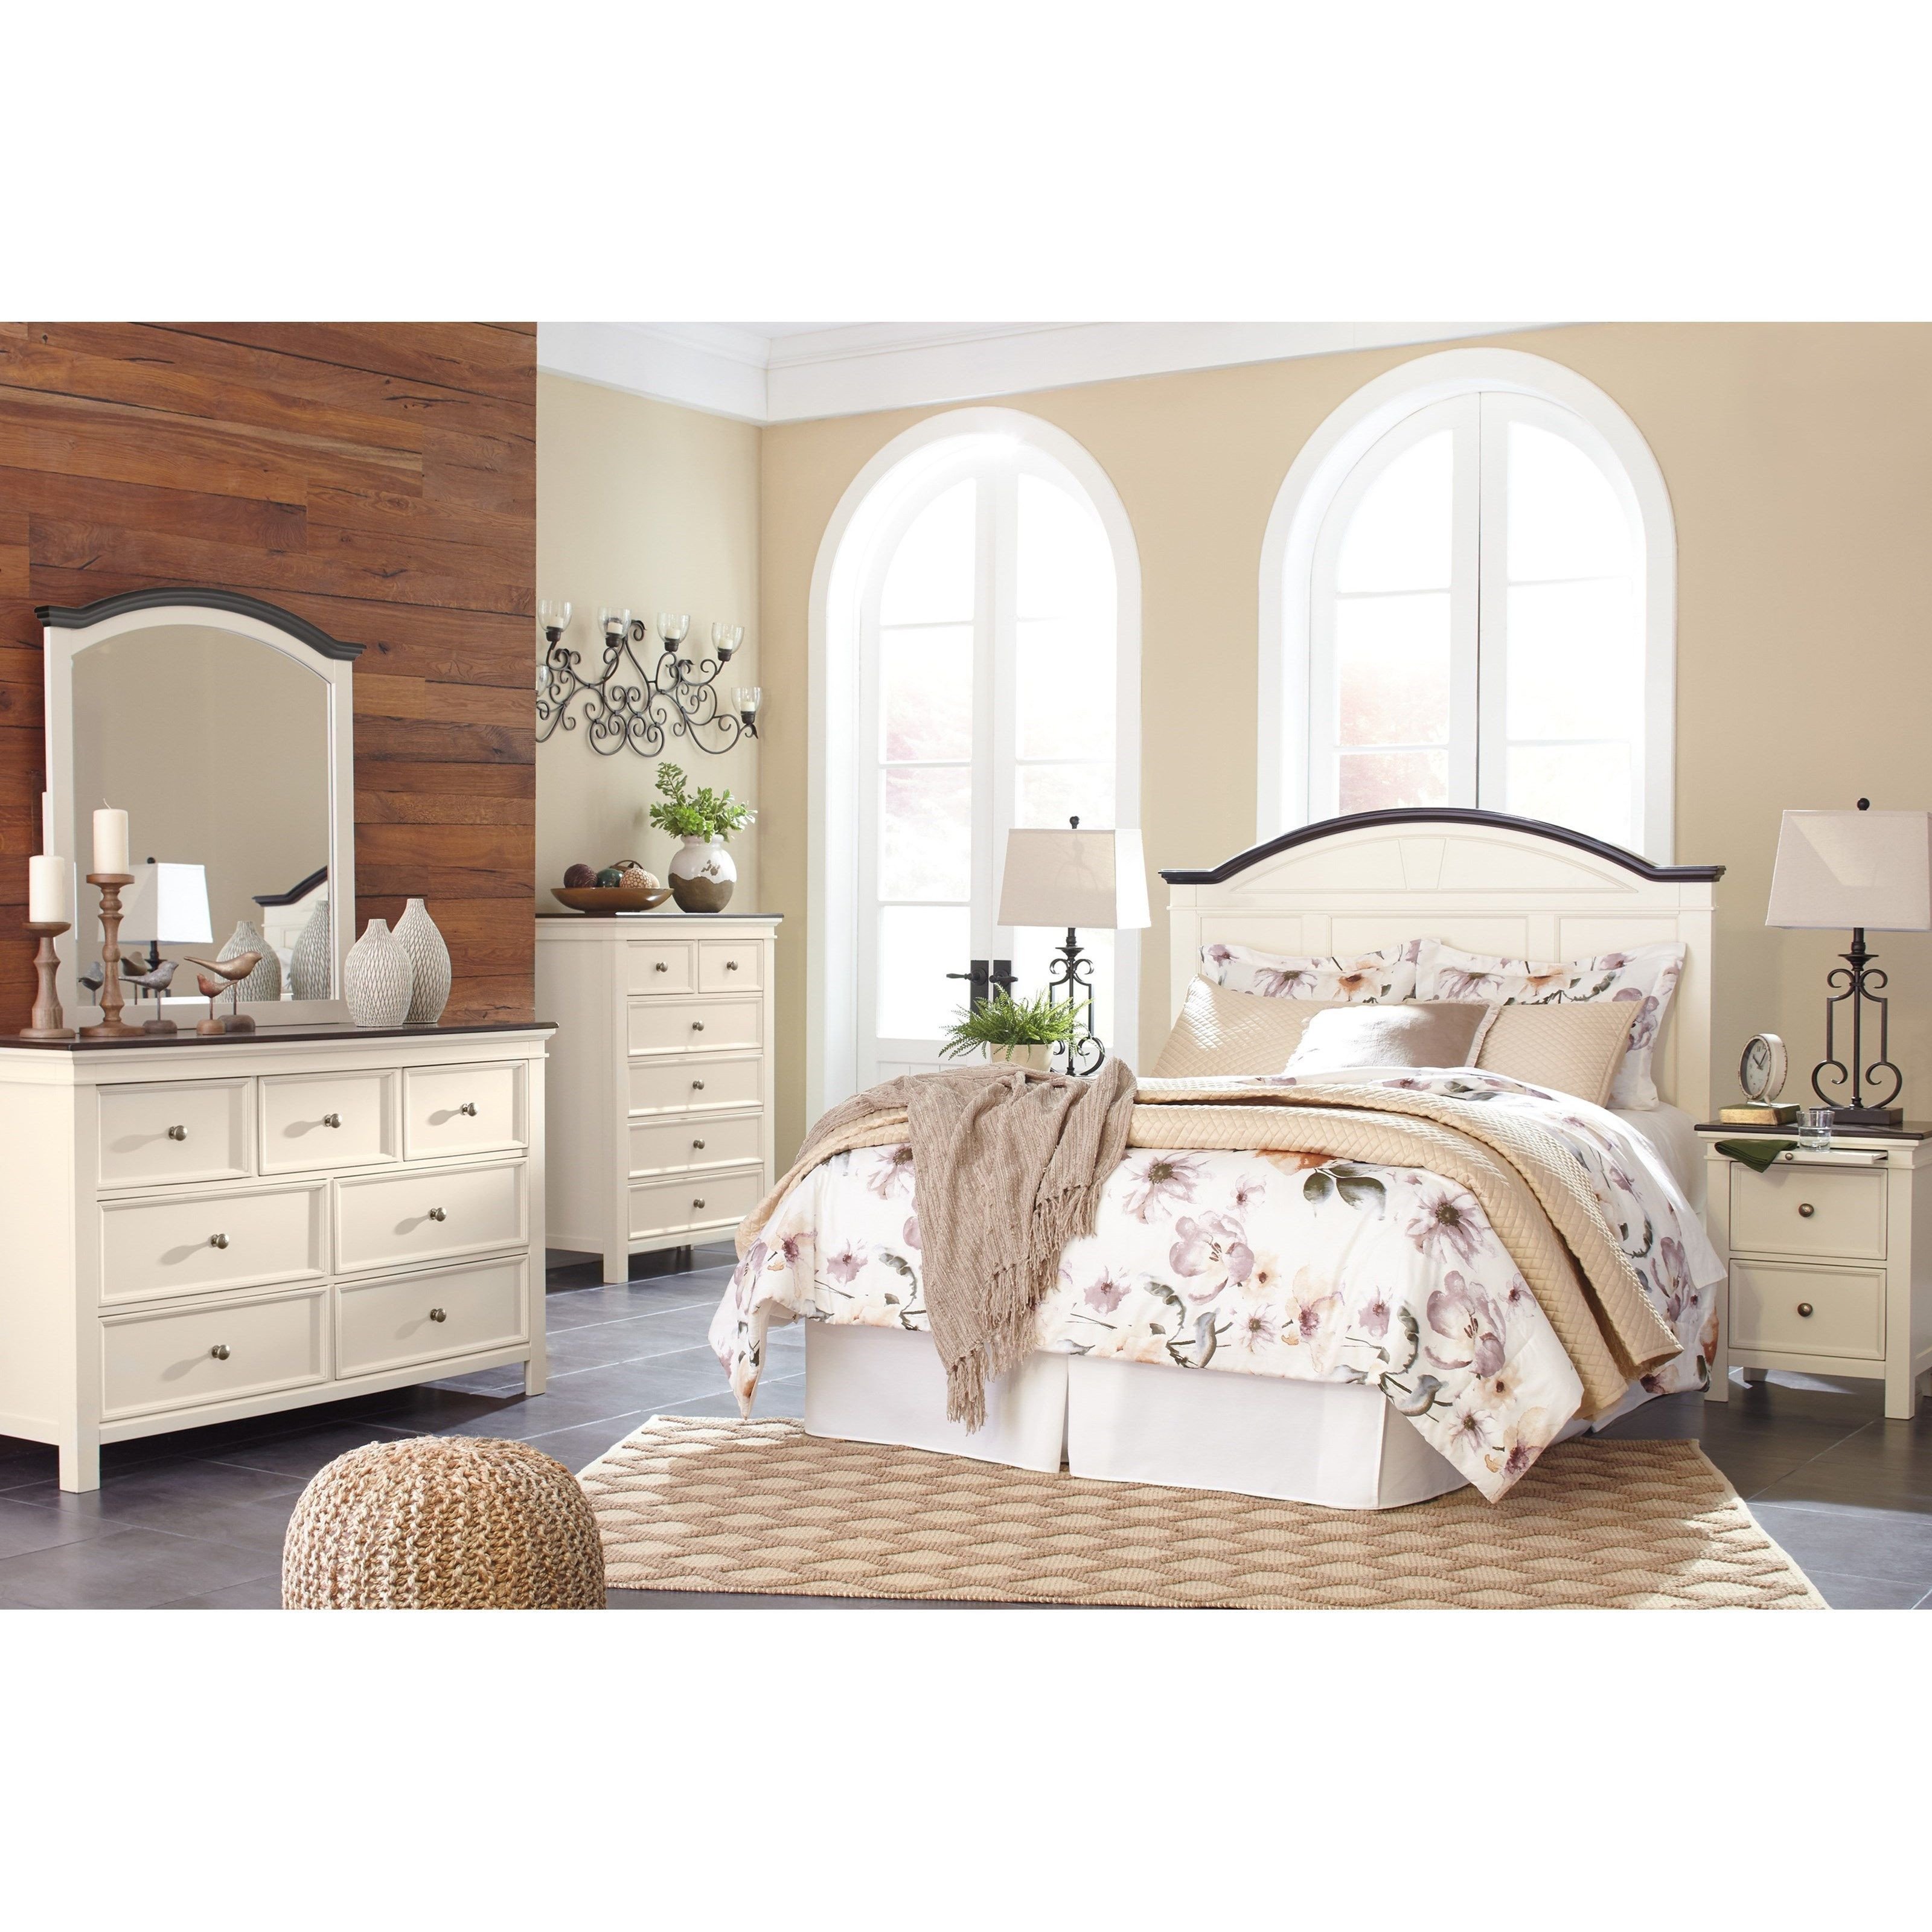 Value City Bedroom Set On Sale Best Of Woodanville Queen Bedroom Group by Signature Design by